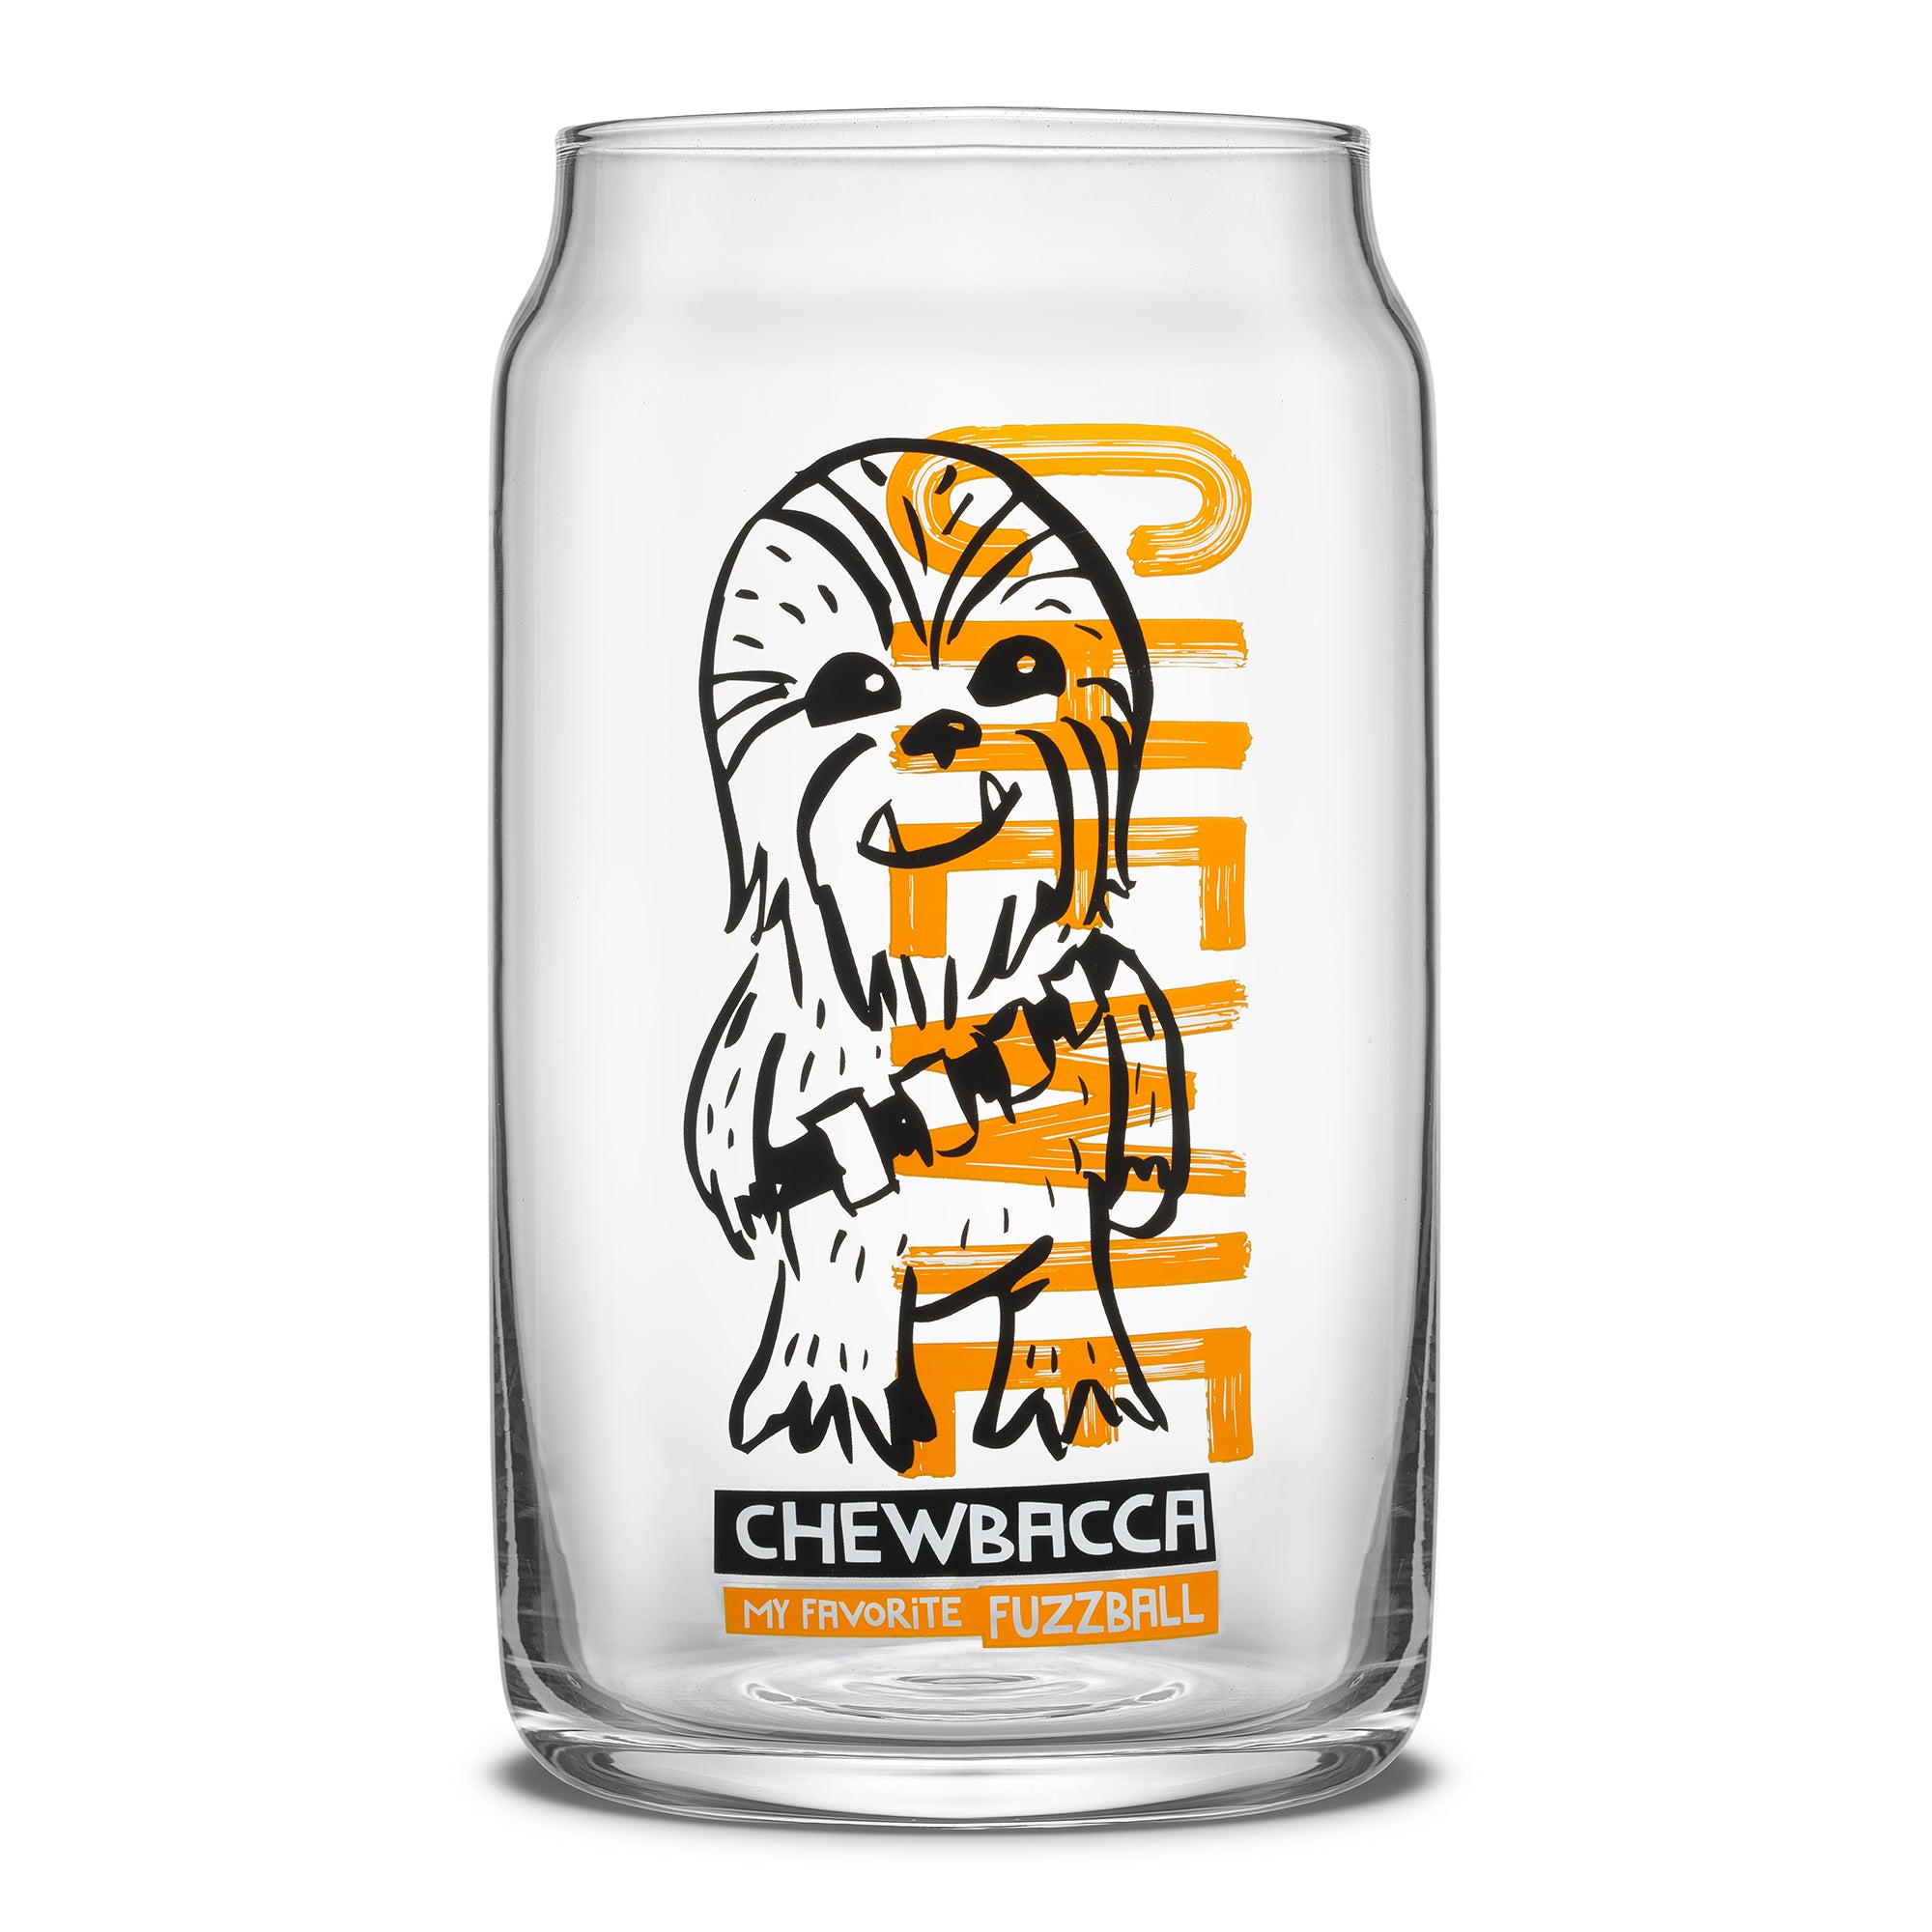 JoyJolt's Star Wars 'Now Playing' glass tumbler set, a must-have addition to any fan's drinkware collection. Featuring Chewbacca.